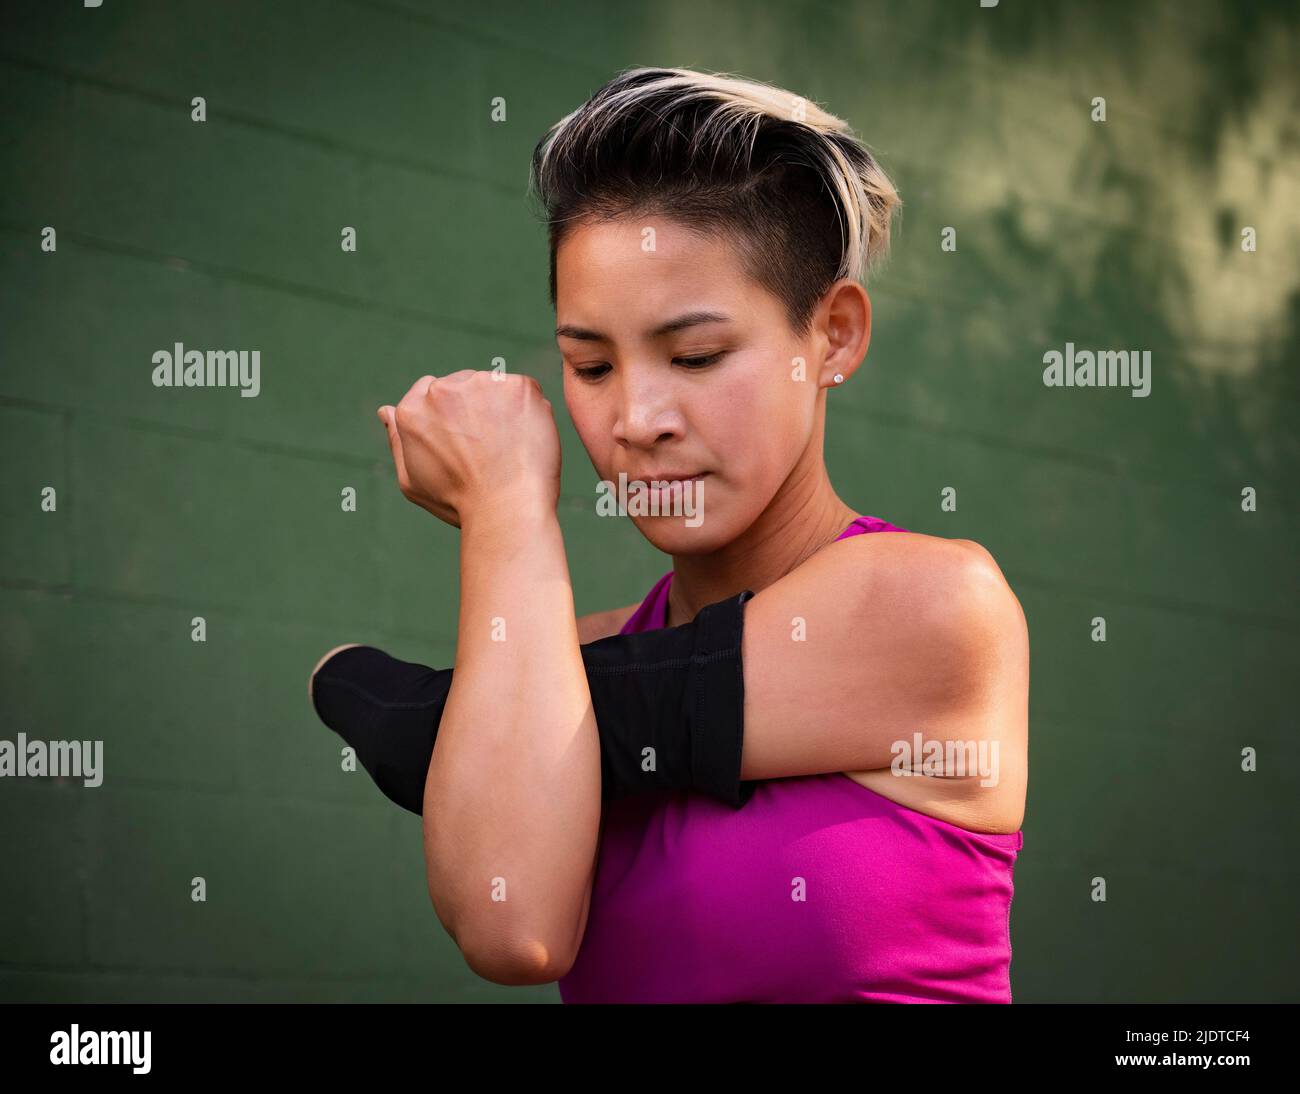 Athletic woman with amputated hand stretching arm Stock Photo